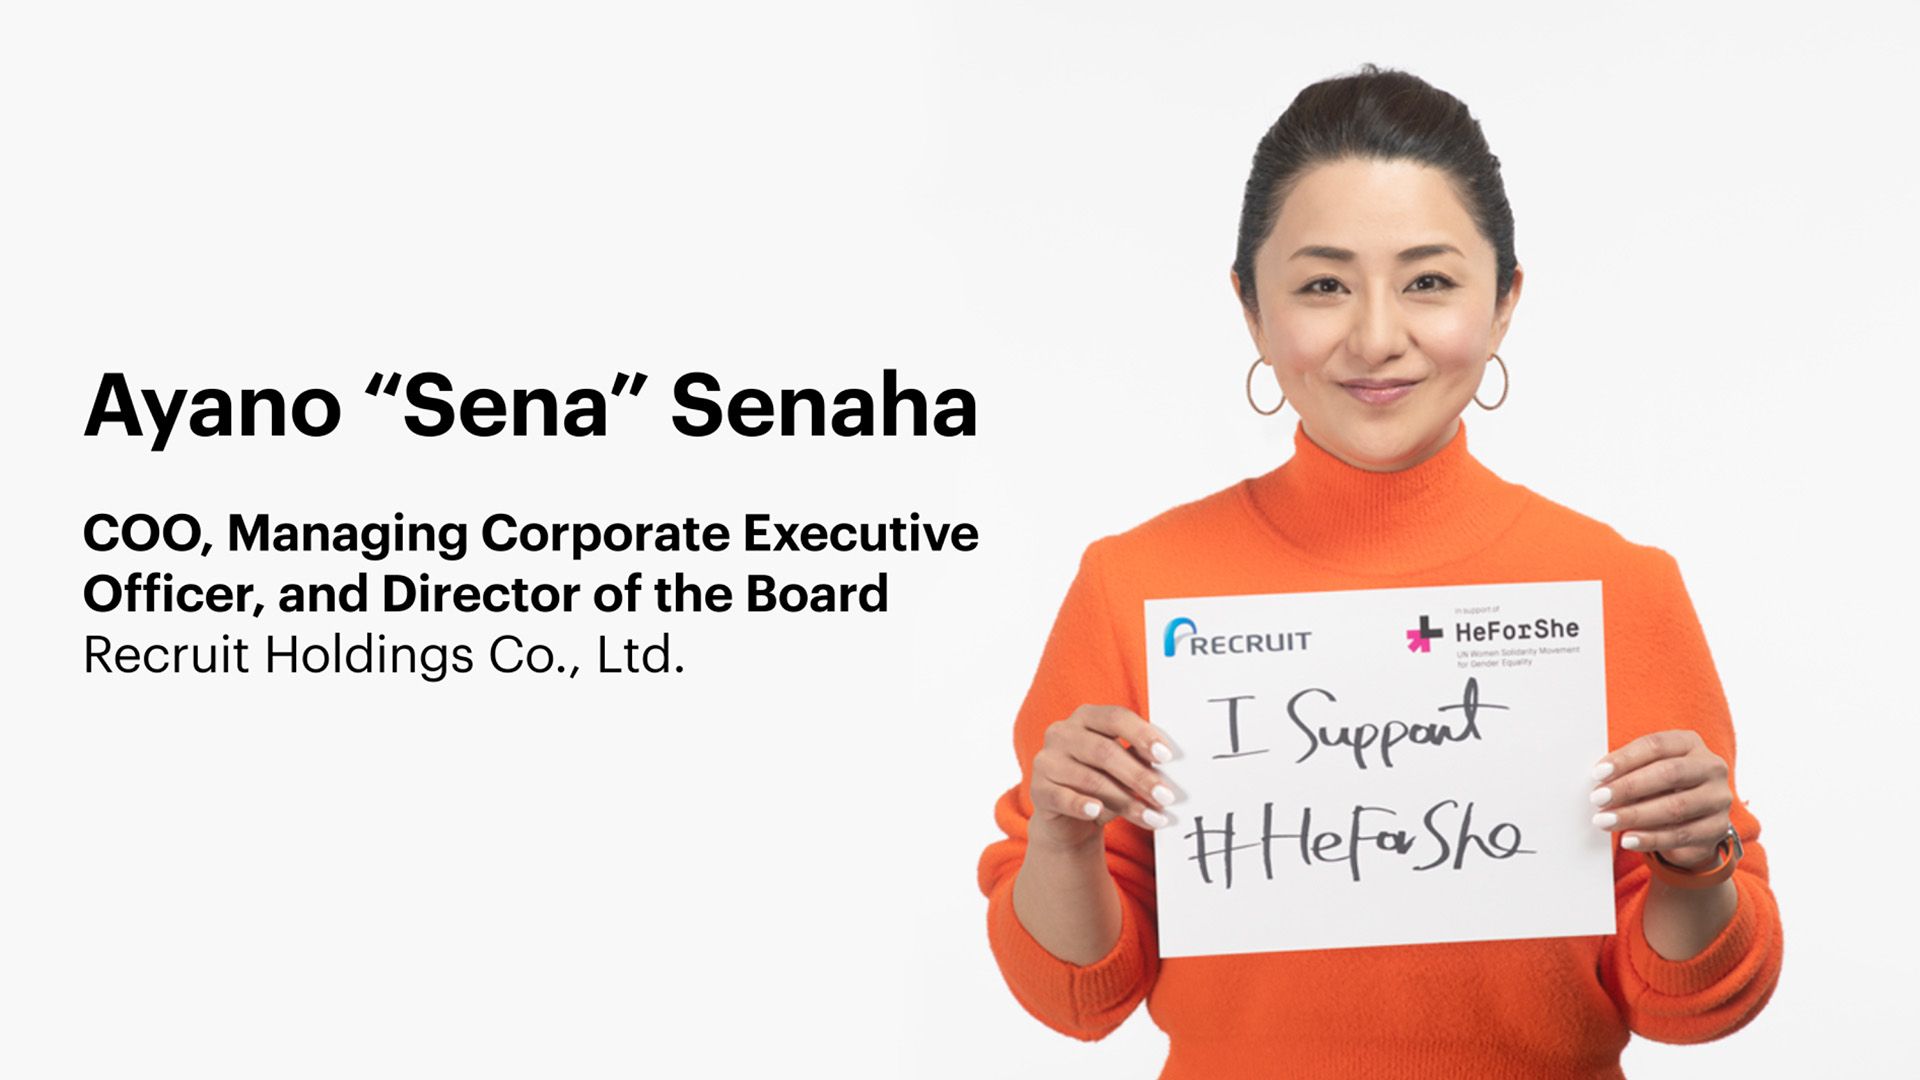 An image showing the endorsement of UN Women’s ”HeForShe” alliance by our COO.